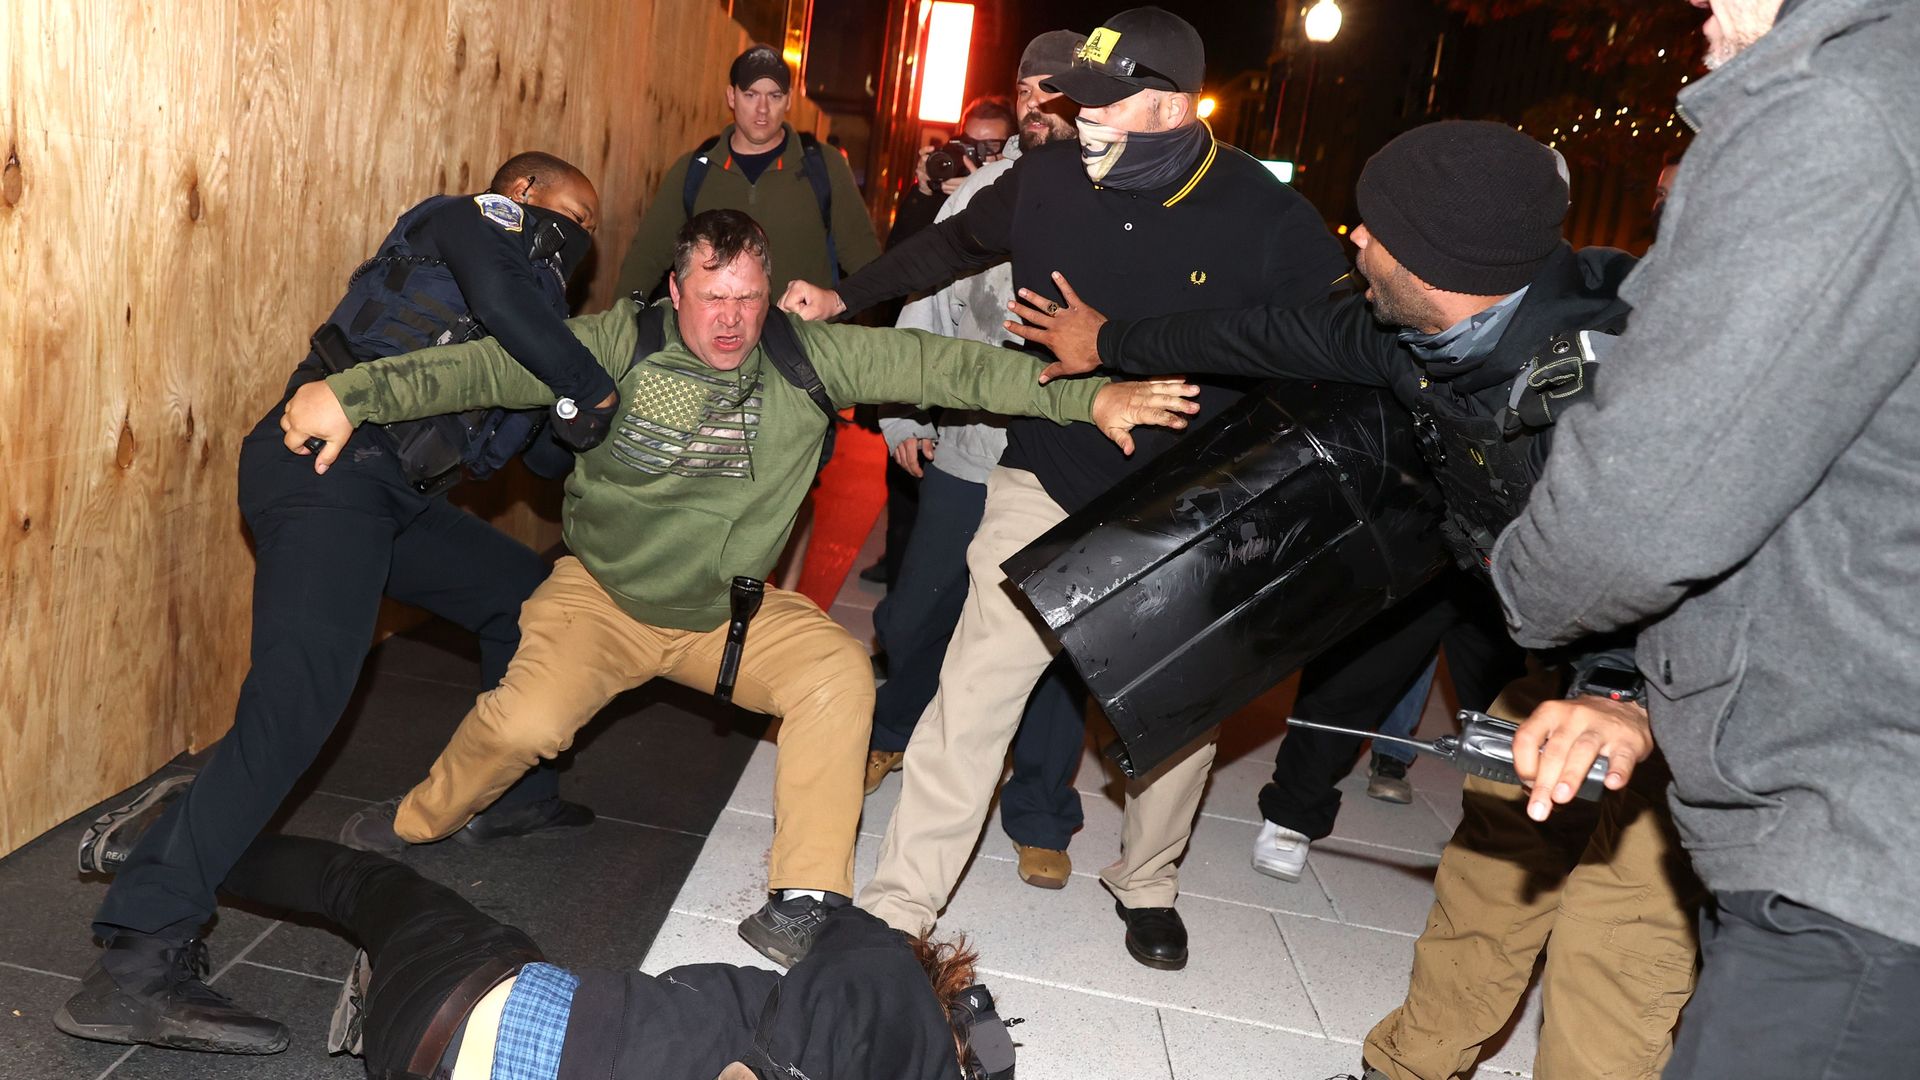 An officer tries to break up a fight between Black Lives Matter protesters and members of the Proud Boys on Nov. 14 in D.C.